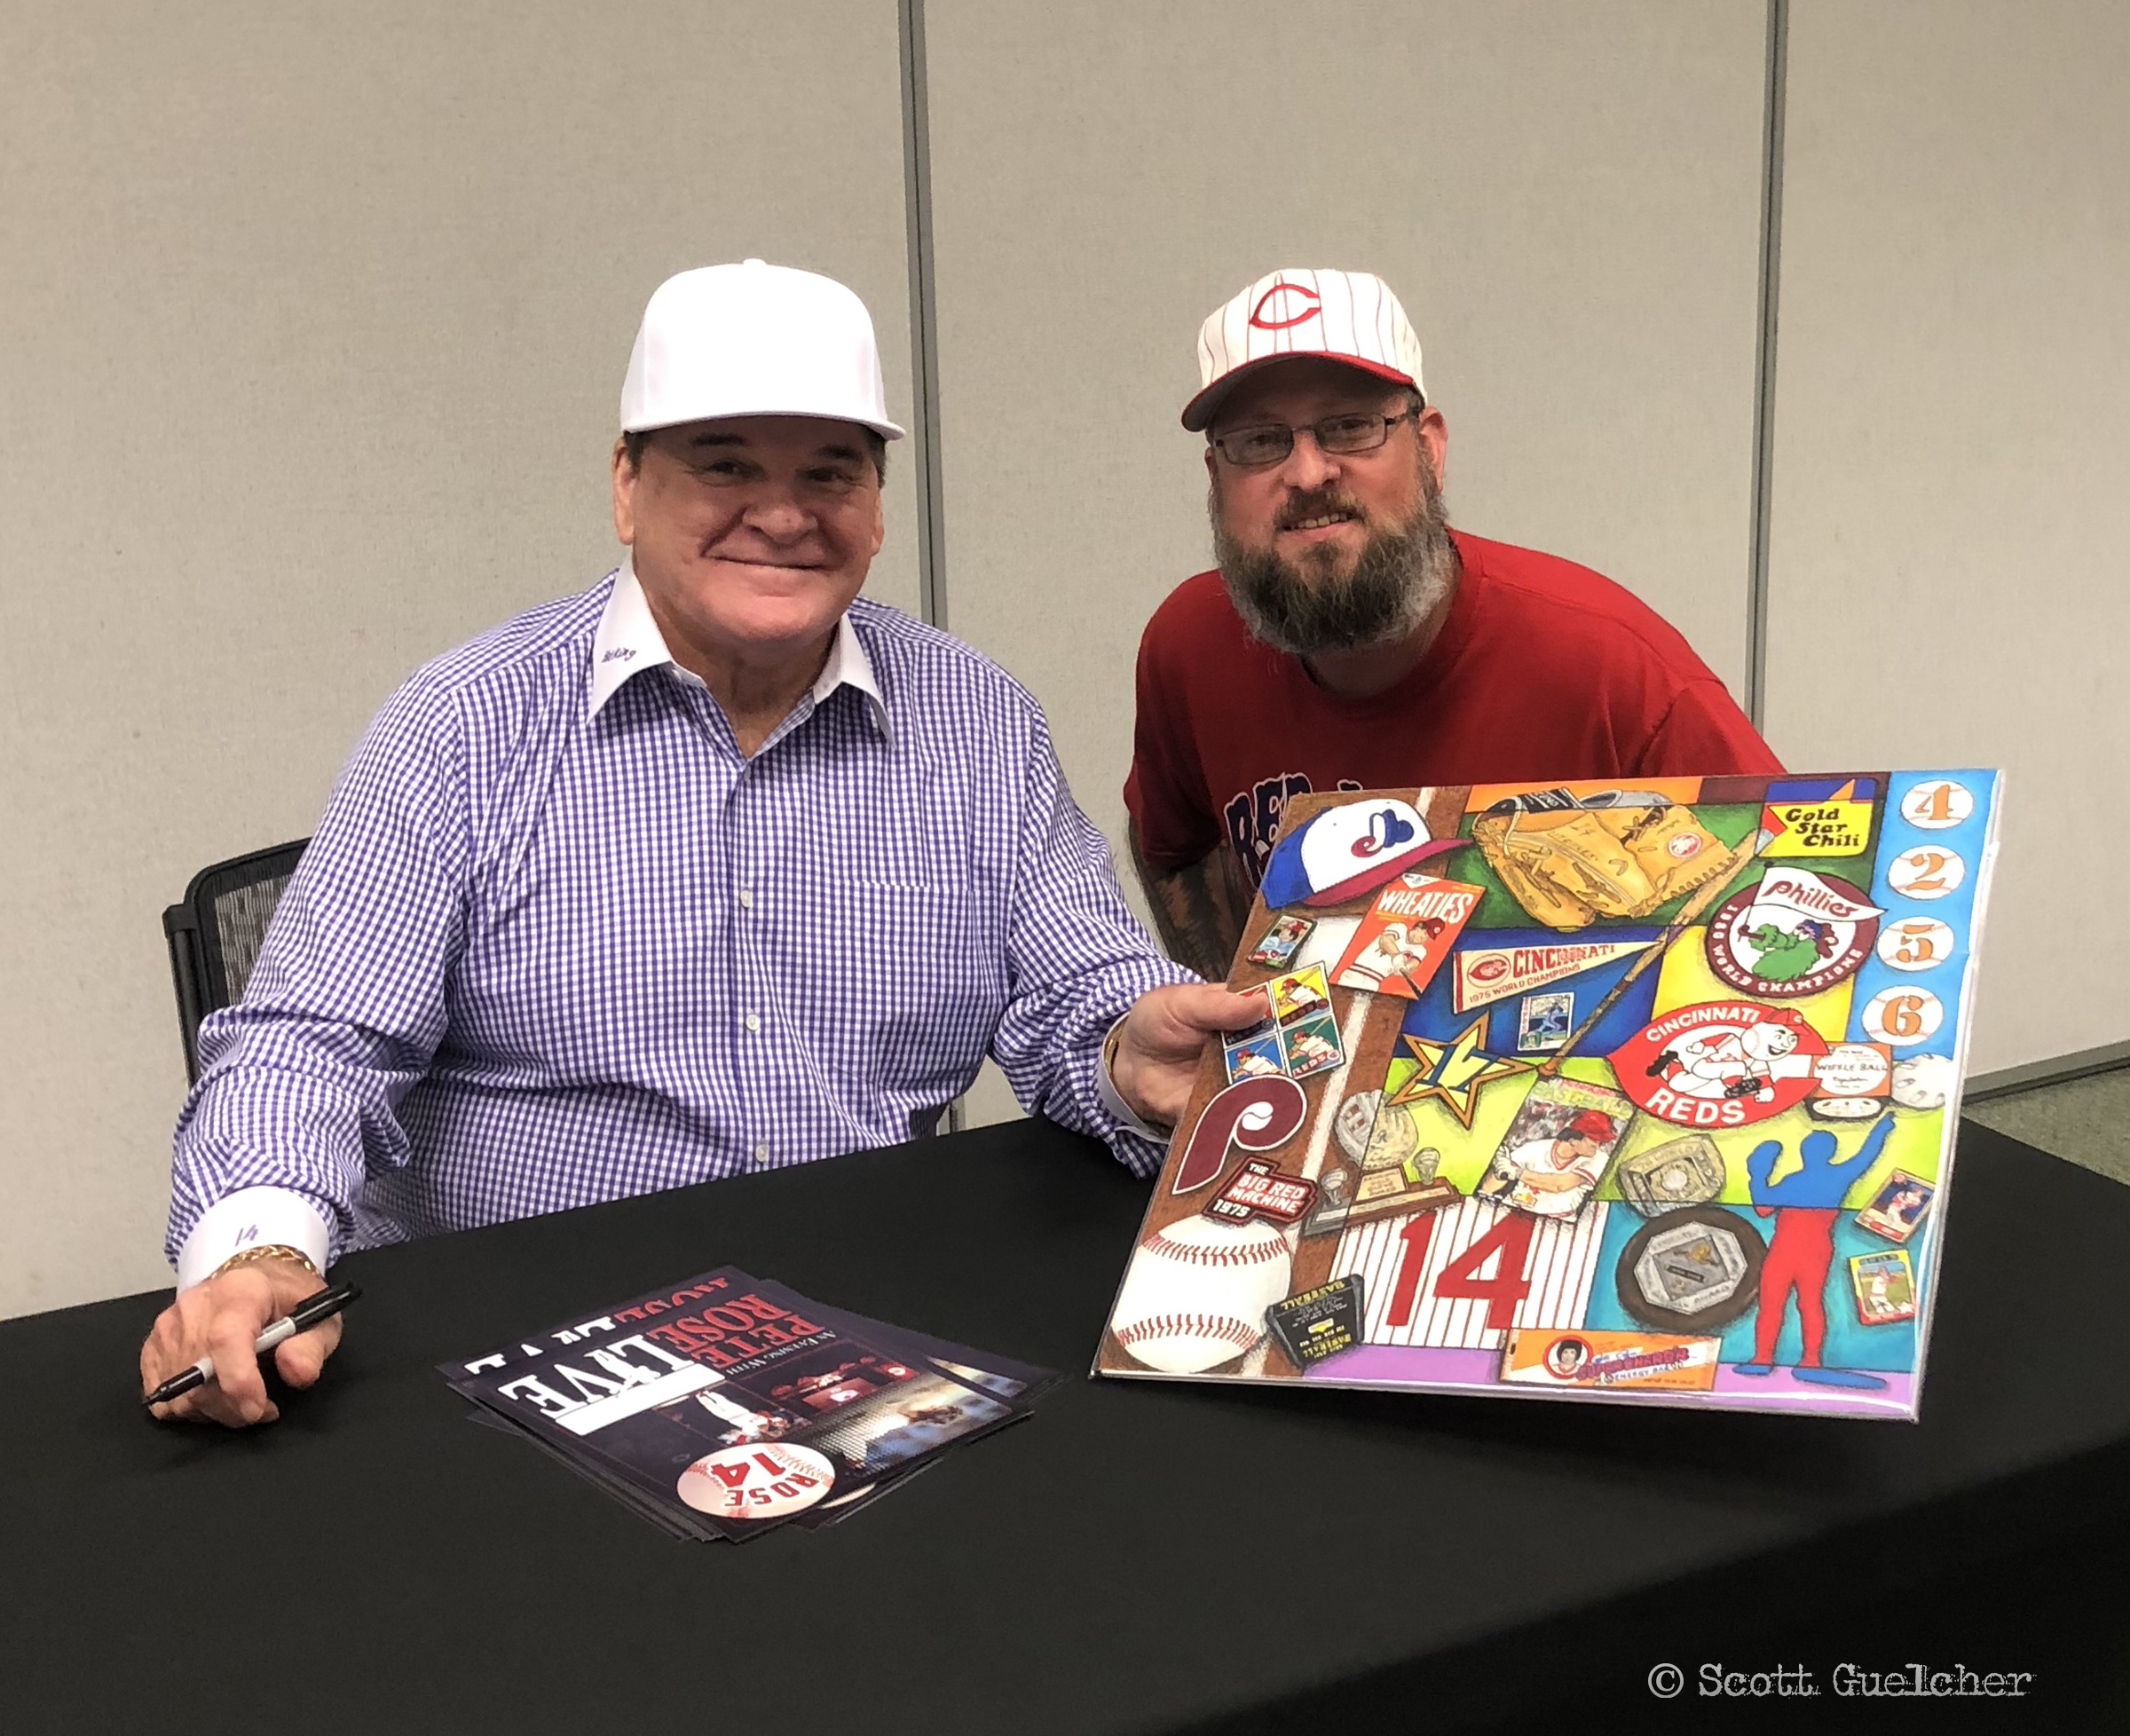 Scott Guelcher Presenting Pete Rose with His Original Artwork “Hit King”